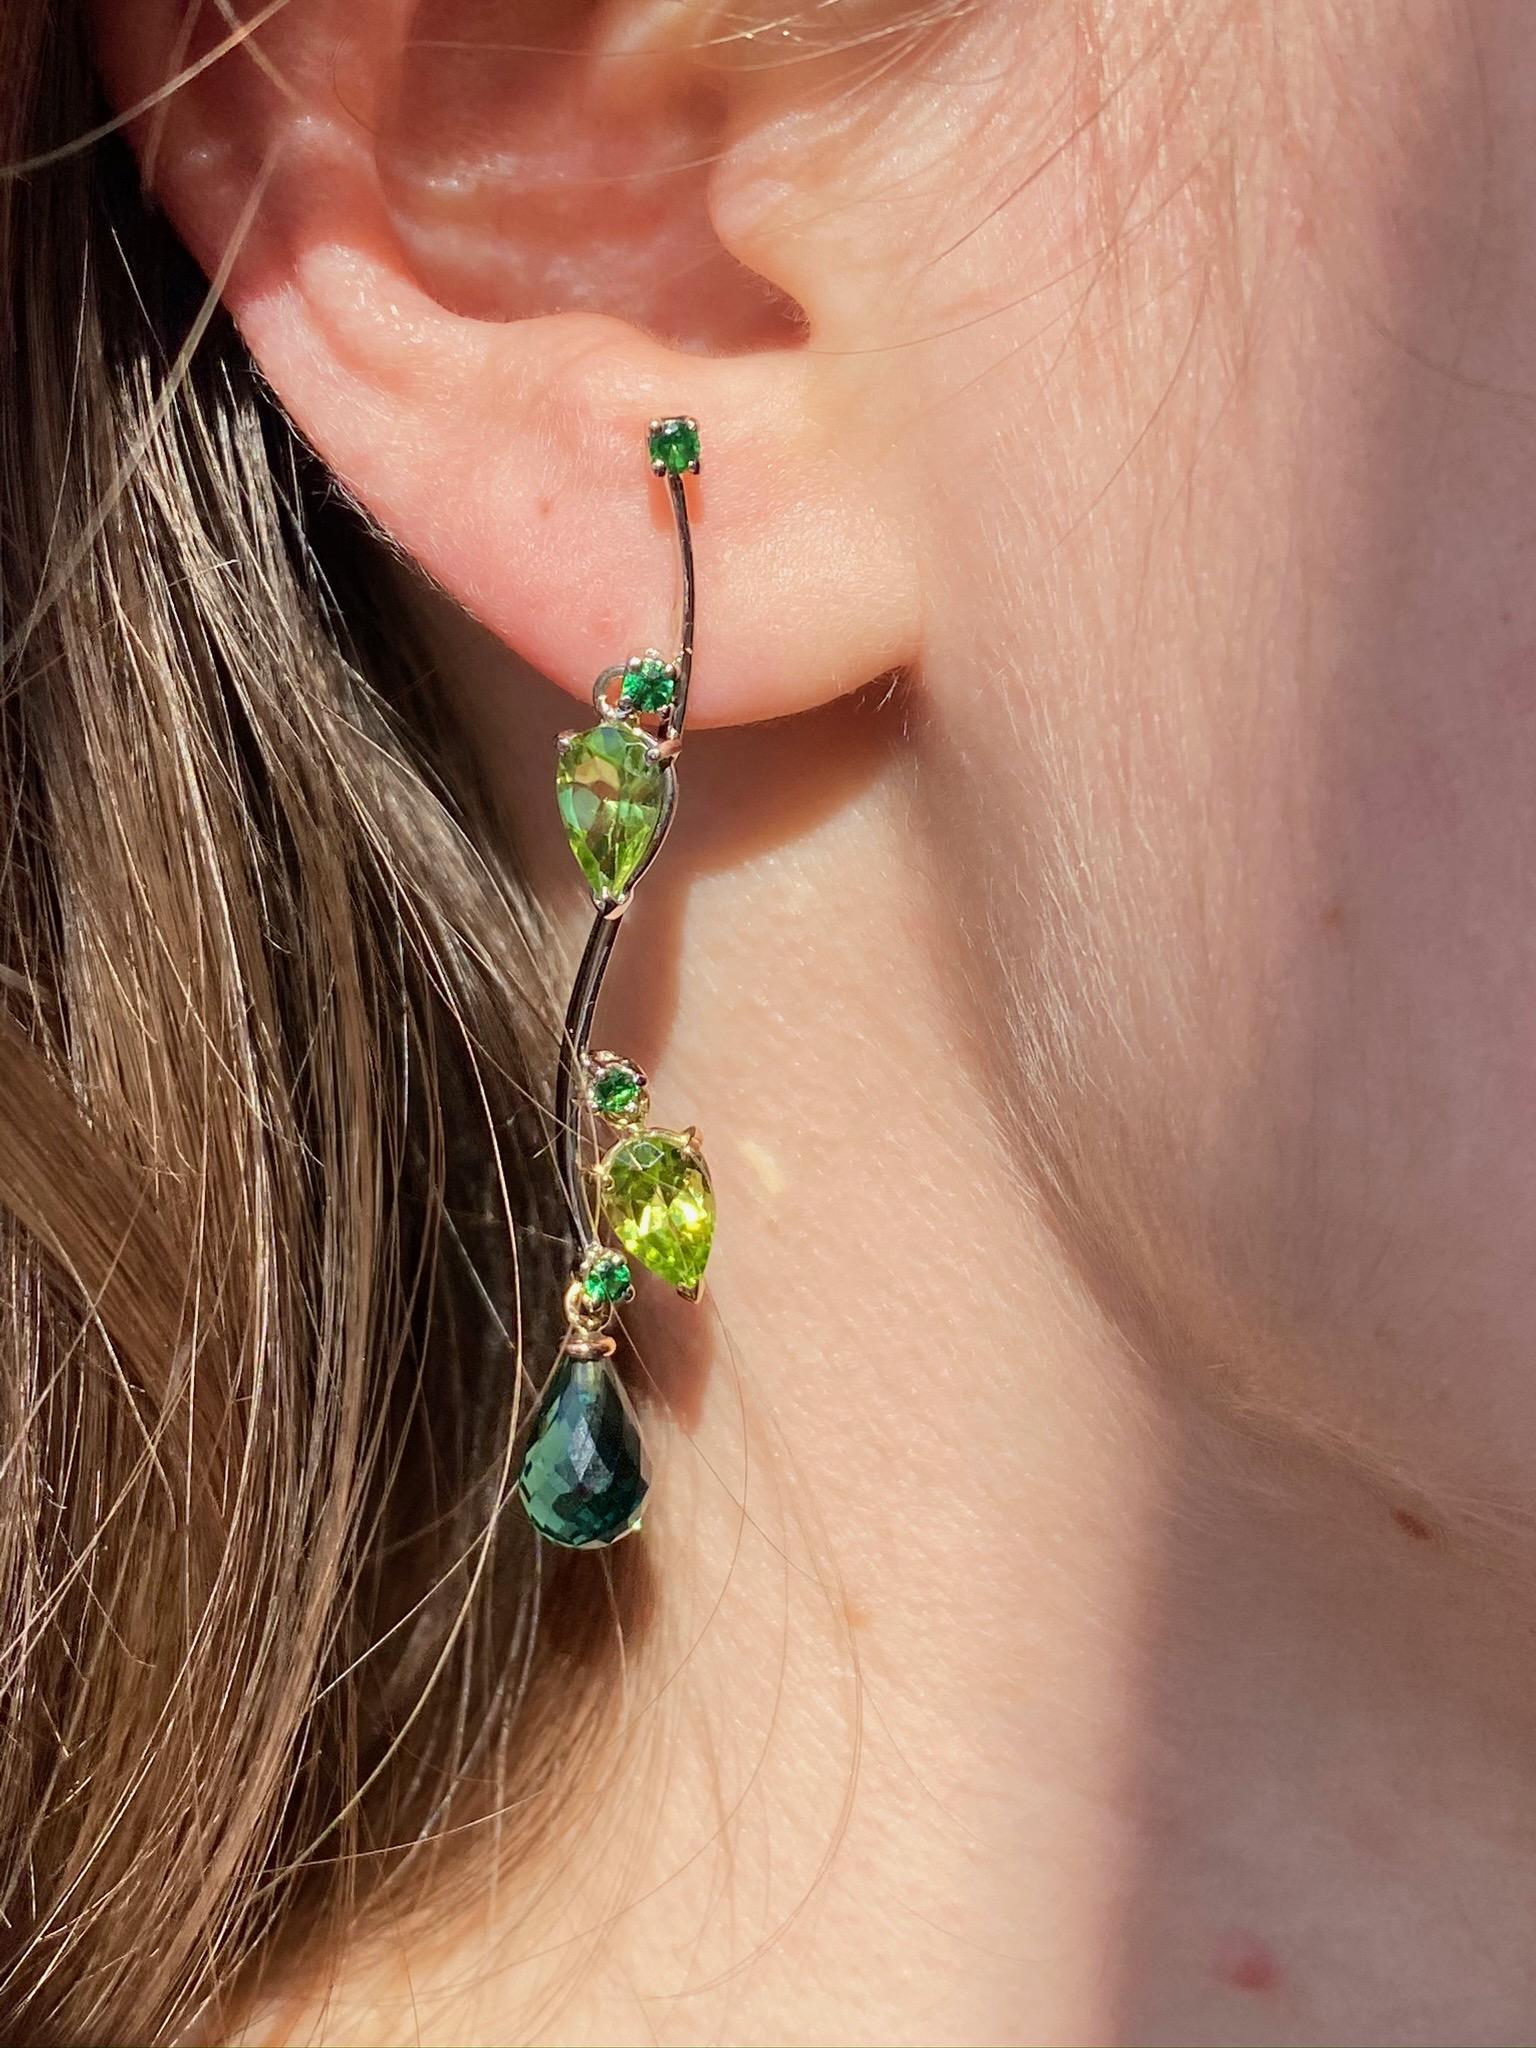 Rossella Ugolini Design Collection a Modern Style dangle earrings handcrafted in 18 Karats Gold with three shade of green colors:  Peridot pear cut, Tsavorite round cut , green Tourmaline Briolet pear drops.  The branches of the trees of Villa